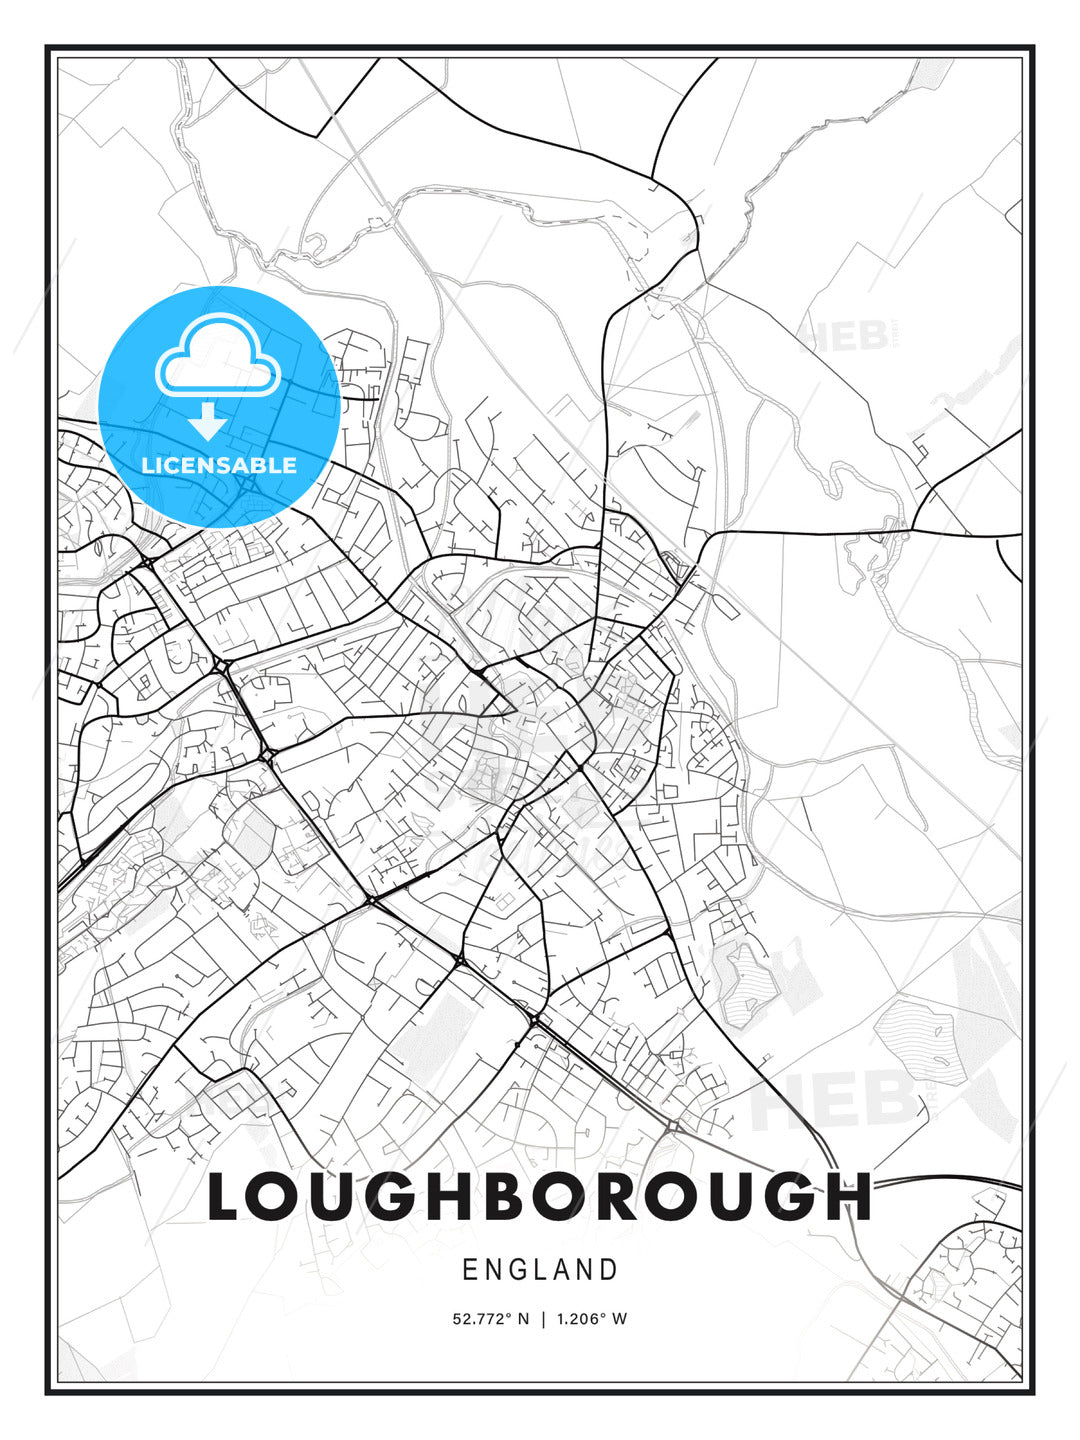 Loughborough, England, Modern Print Template in Various Formats - HEBSTREITS Sketches